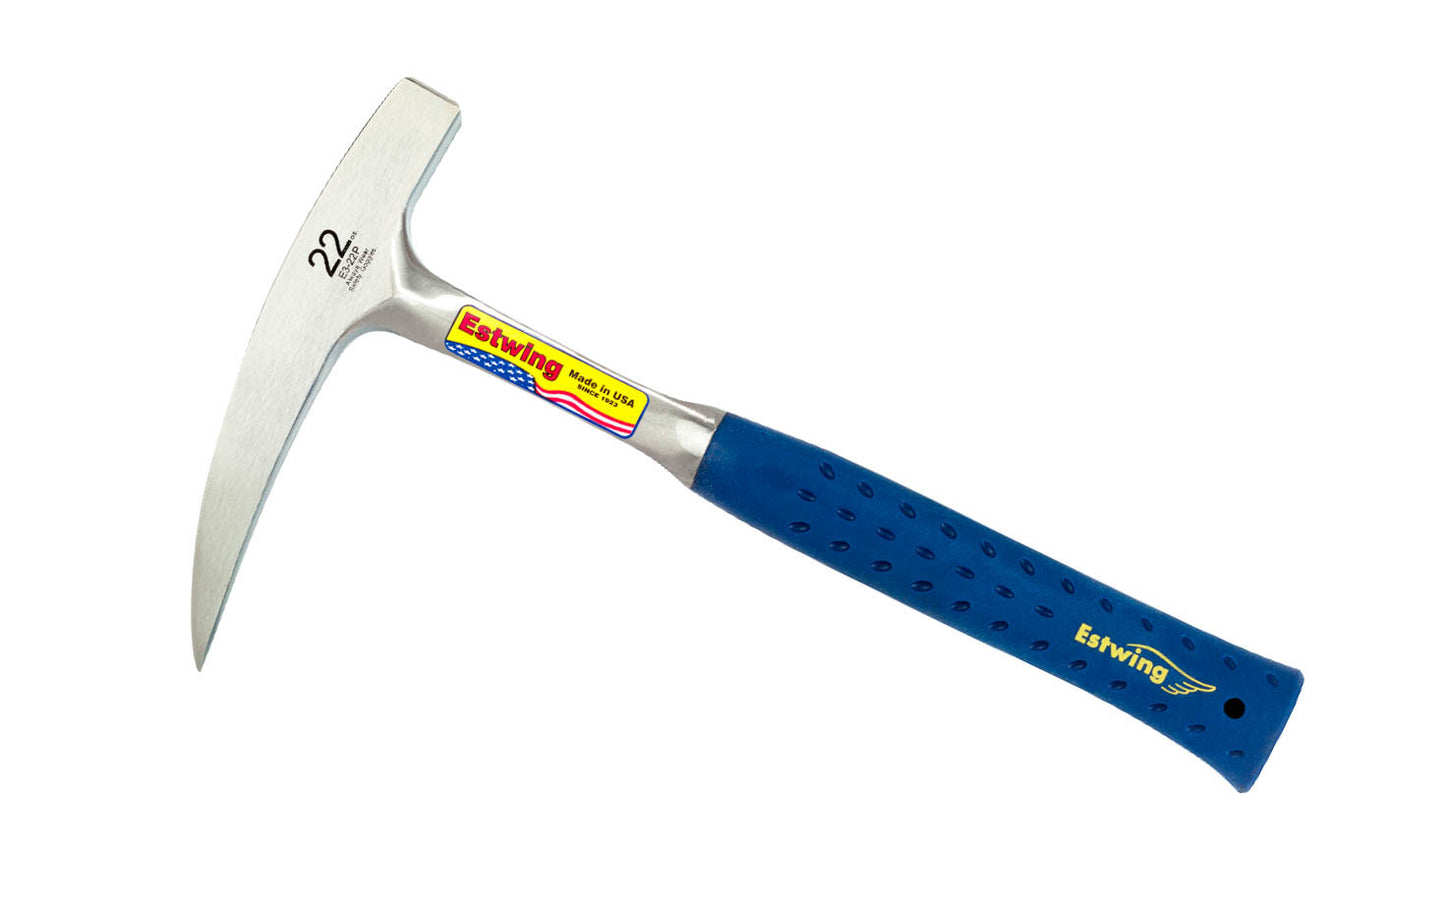 The Estwing Rock Pick Geologist Hammer with Nylon Grip is the  #1 choice of geologists. Model #E3-14P & #E3-22P. Made in USA ~ 034139626213 ~ 034139623212